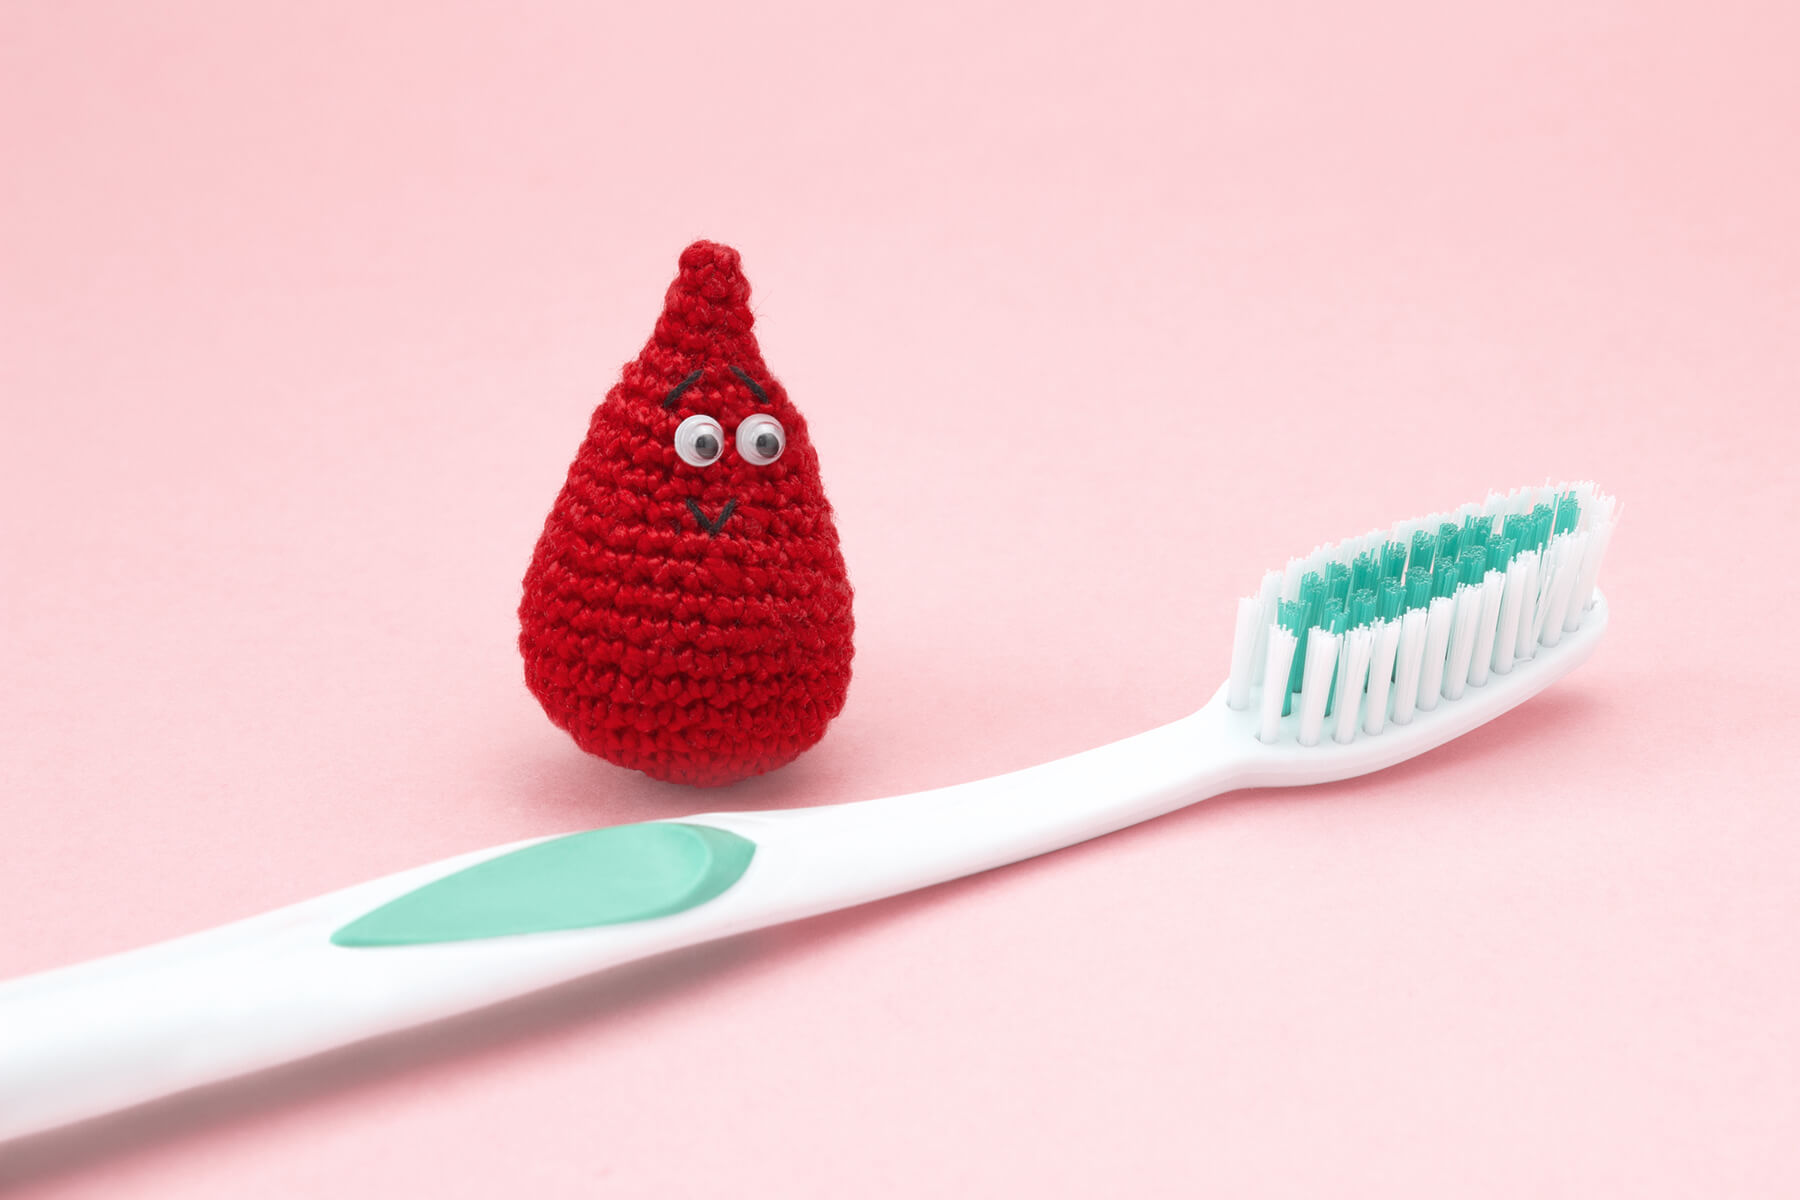 Blood droplet mascot standing next to a toothbrush